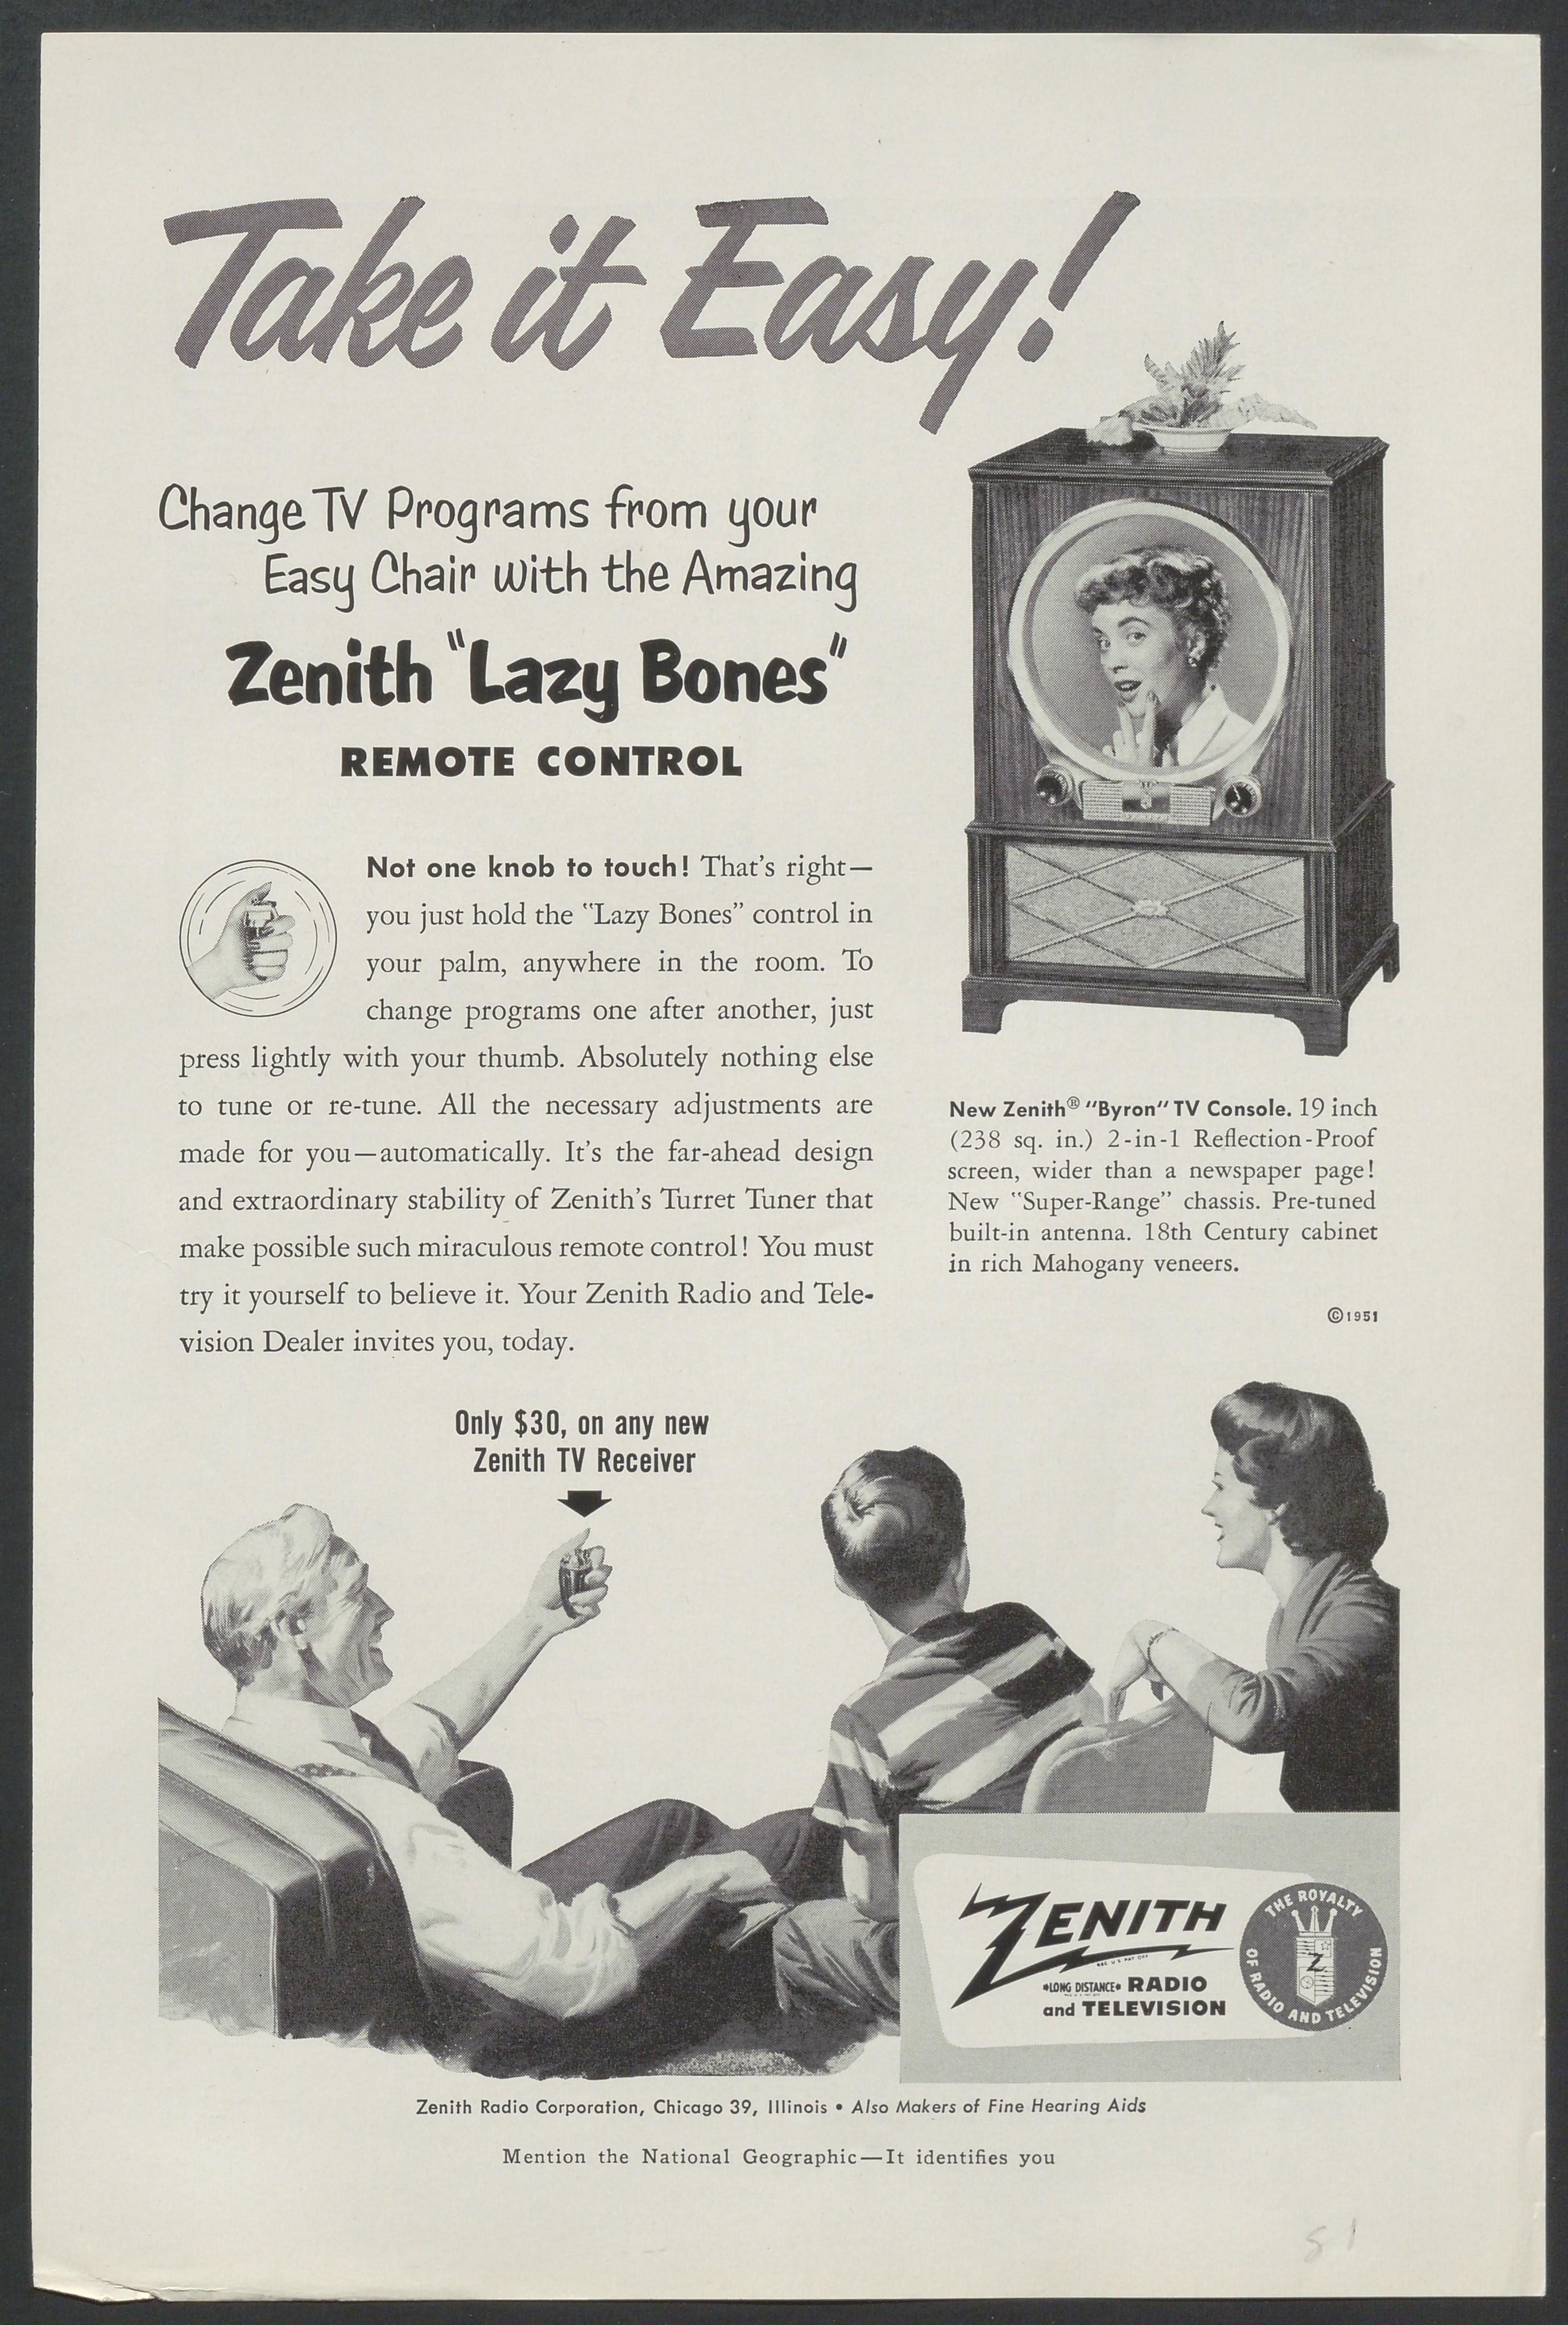 Adfor Zenith "Lazy Bones" remote control system. Illustrations of the product in use and text.